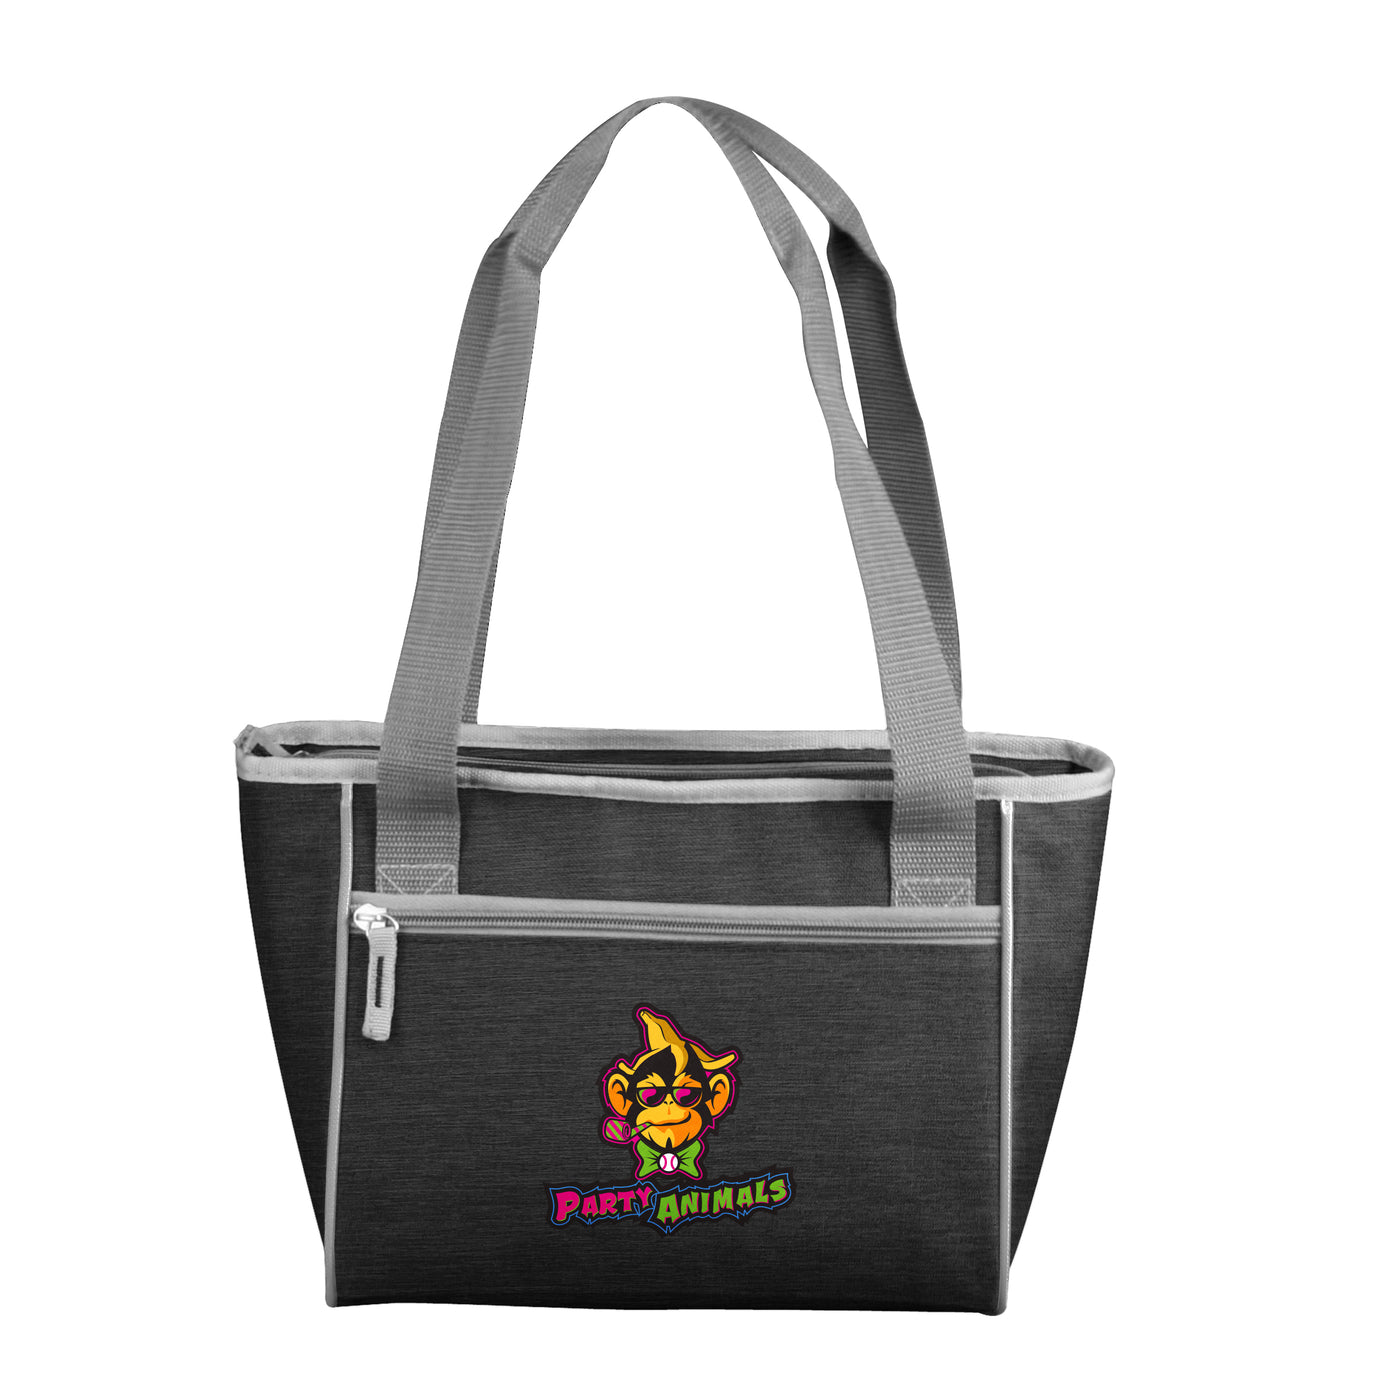 Savannah Party Animals 16 Can Cooler Tote